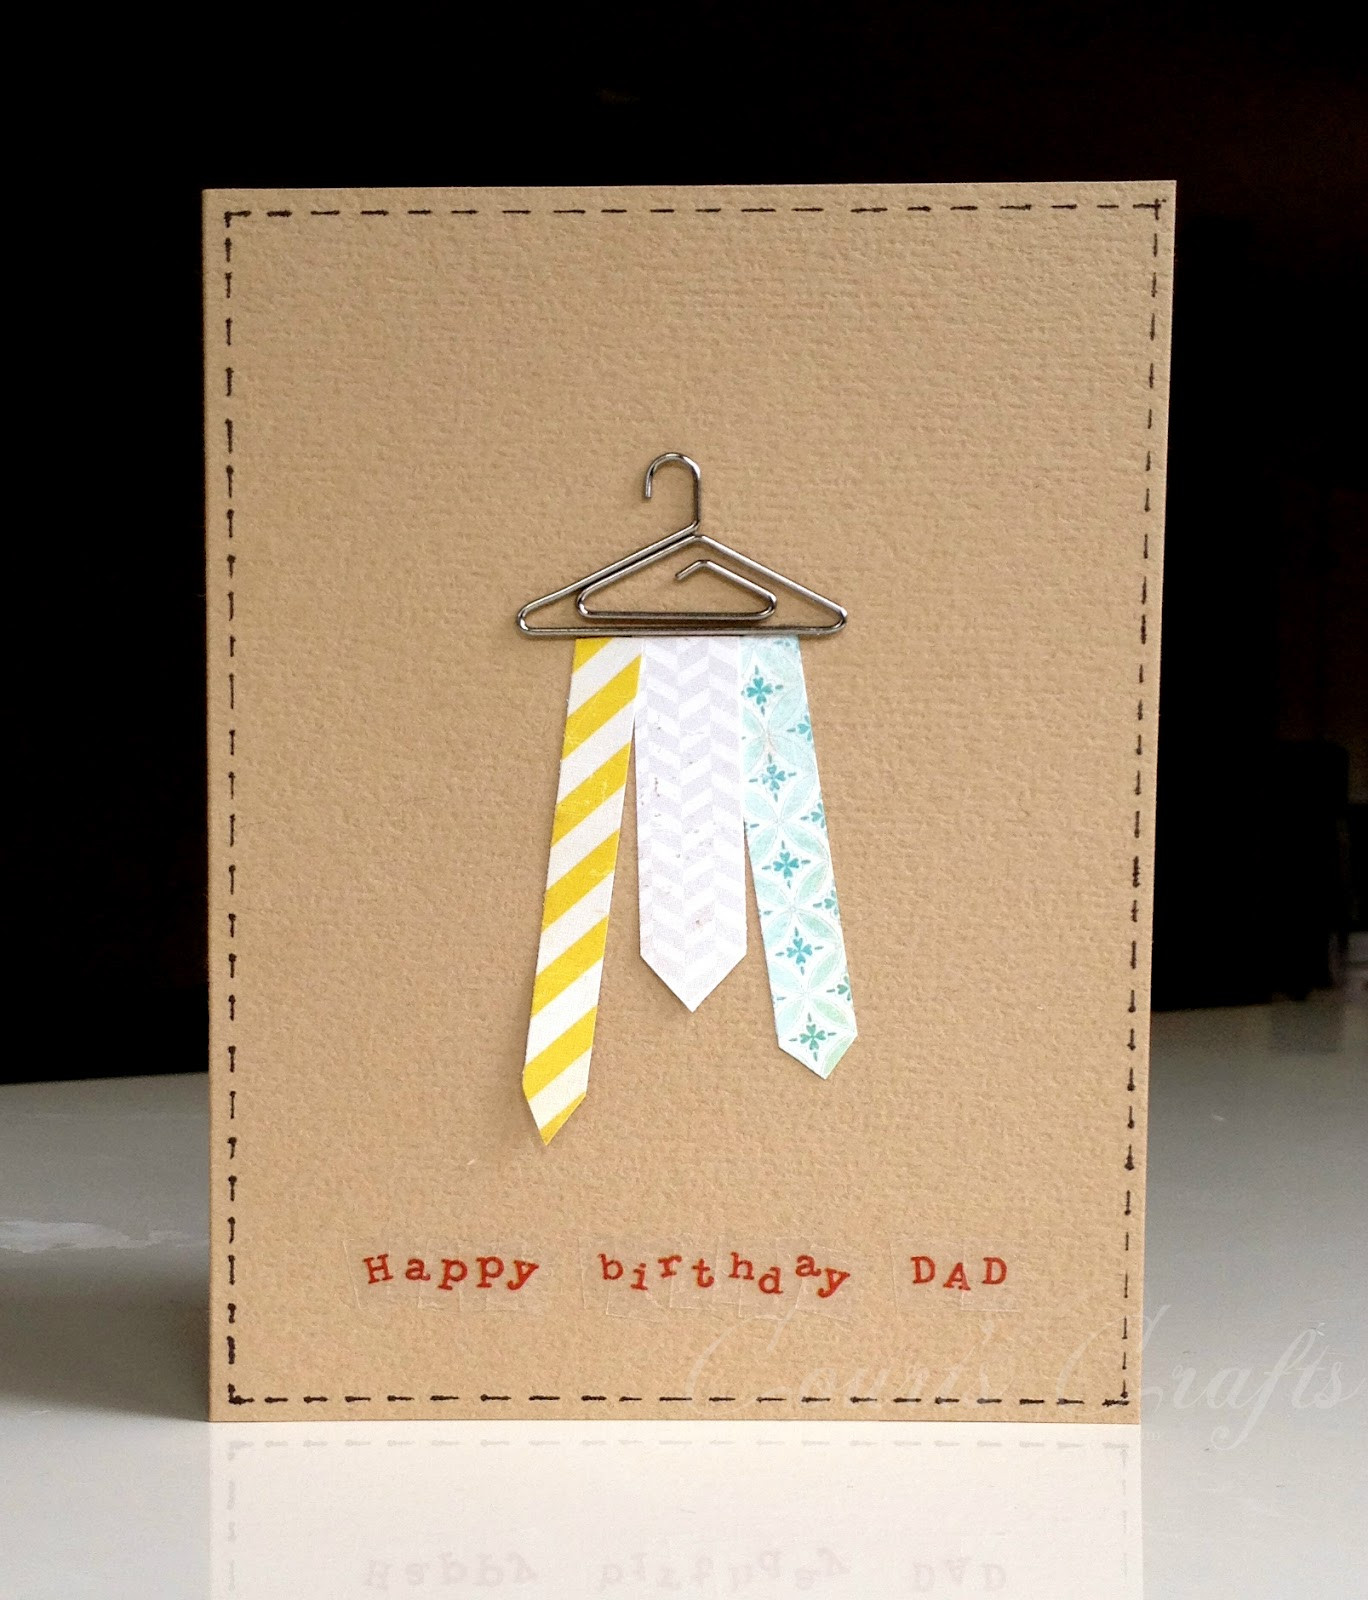 Best ideas about Dad Birthday Card
. Save or Pin Pumpkin Spice Happy birthday dad Now.